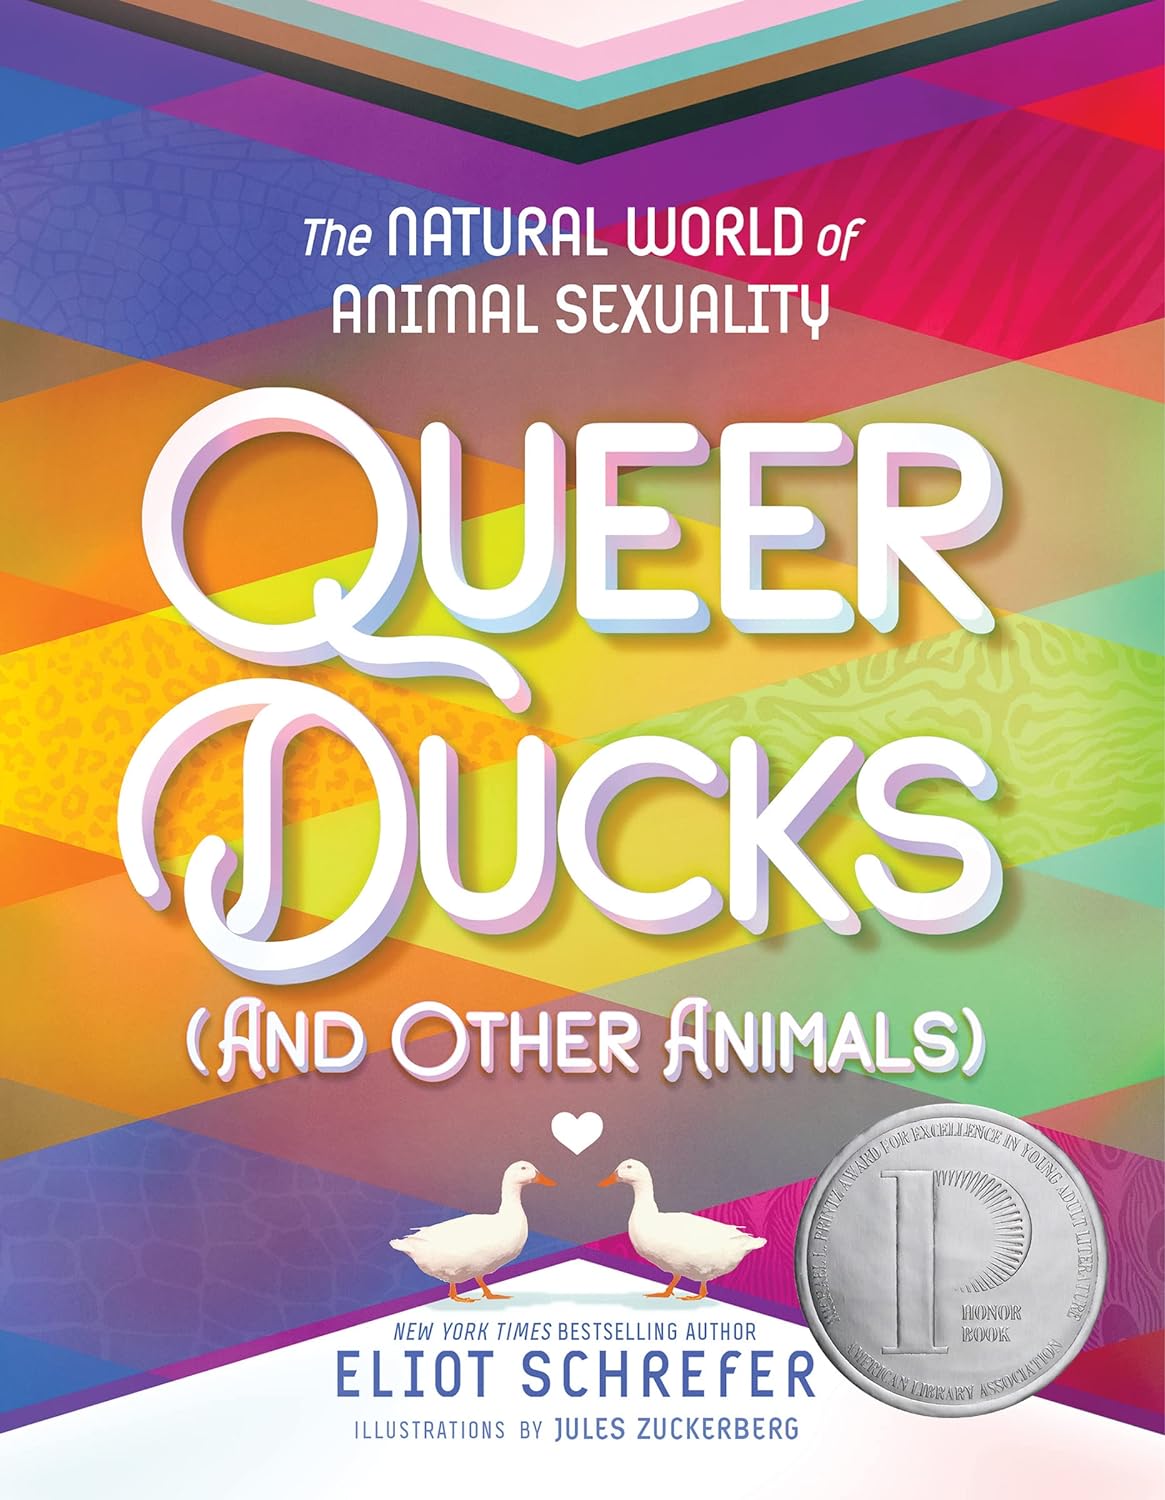 Queer Ducks (And Other Animals) by Eliot Schrefer